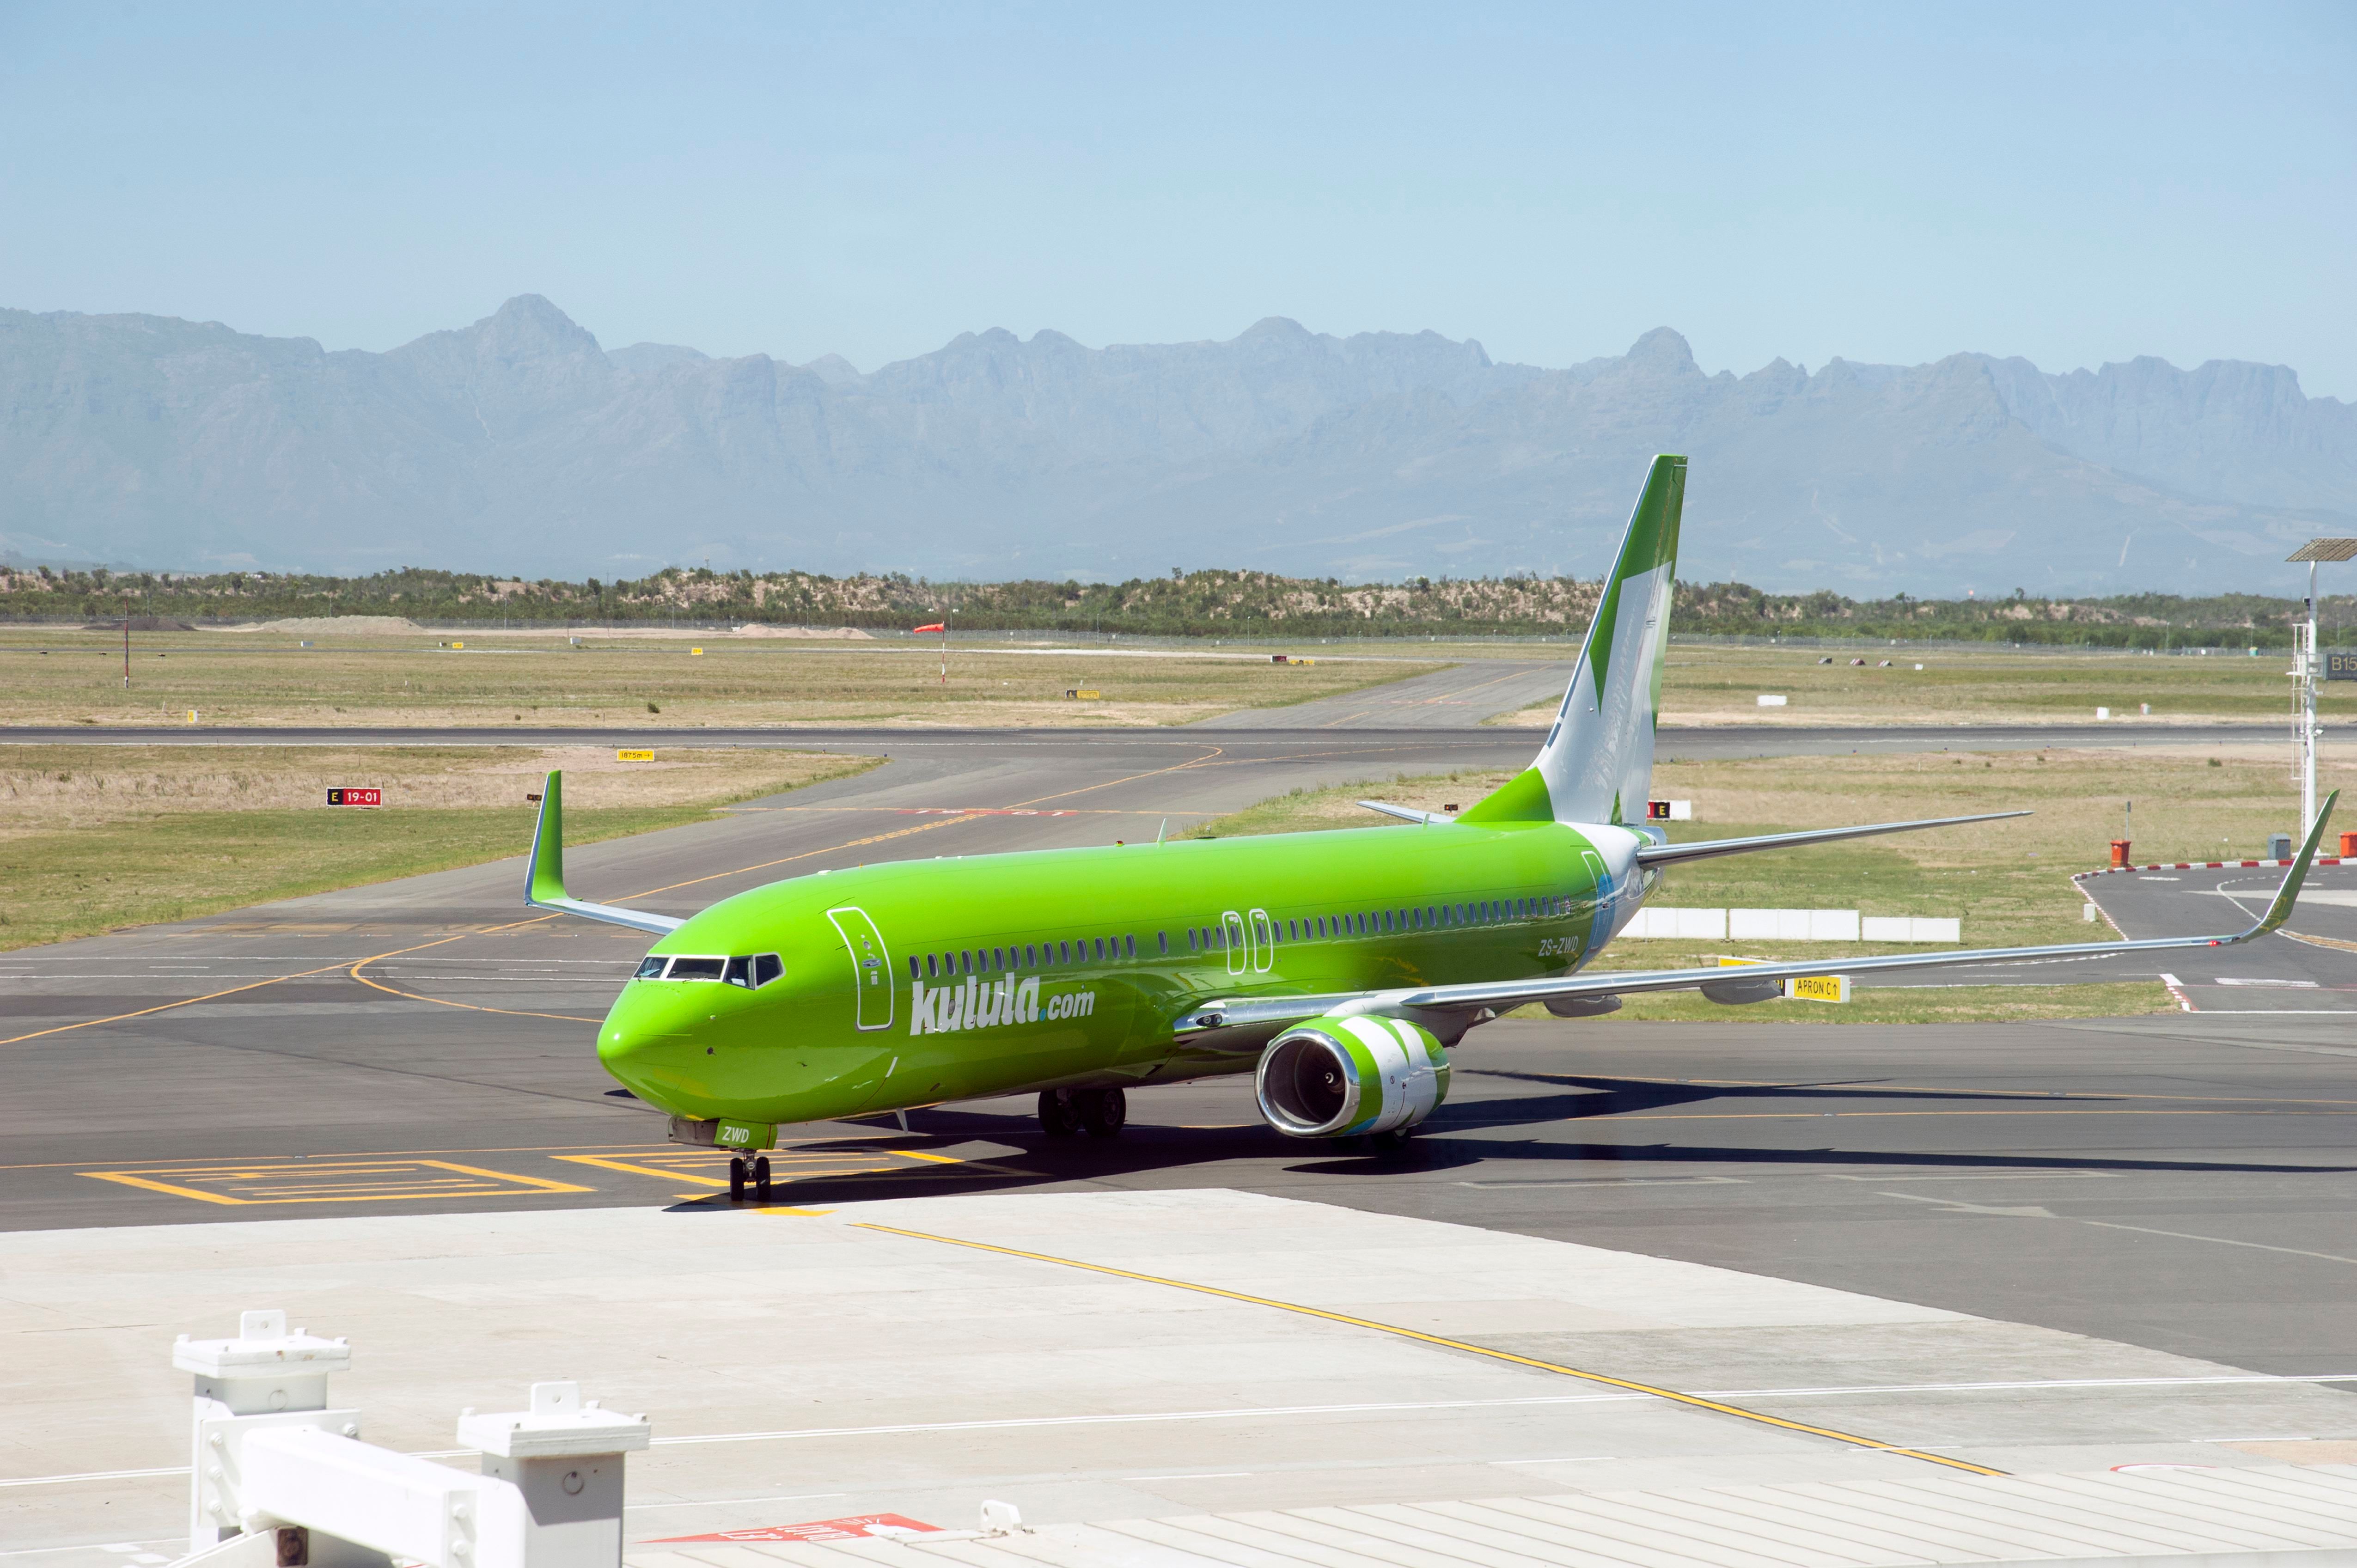 Comair Boeing 737 at Cape Town International Airport